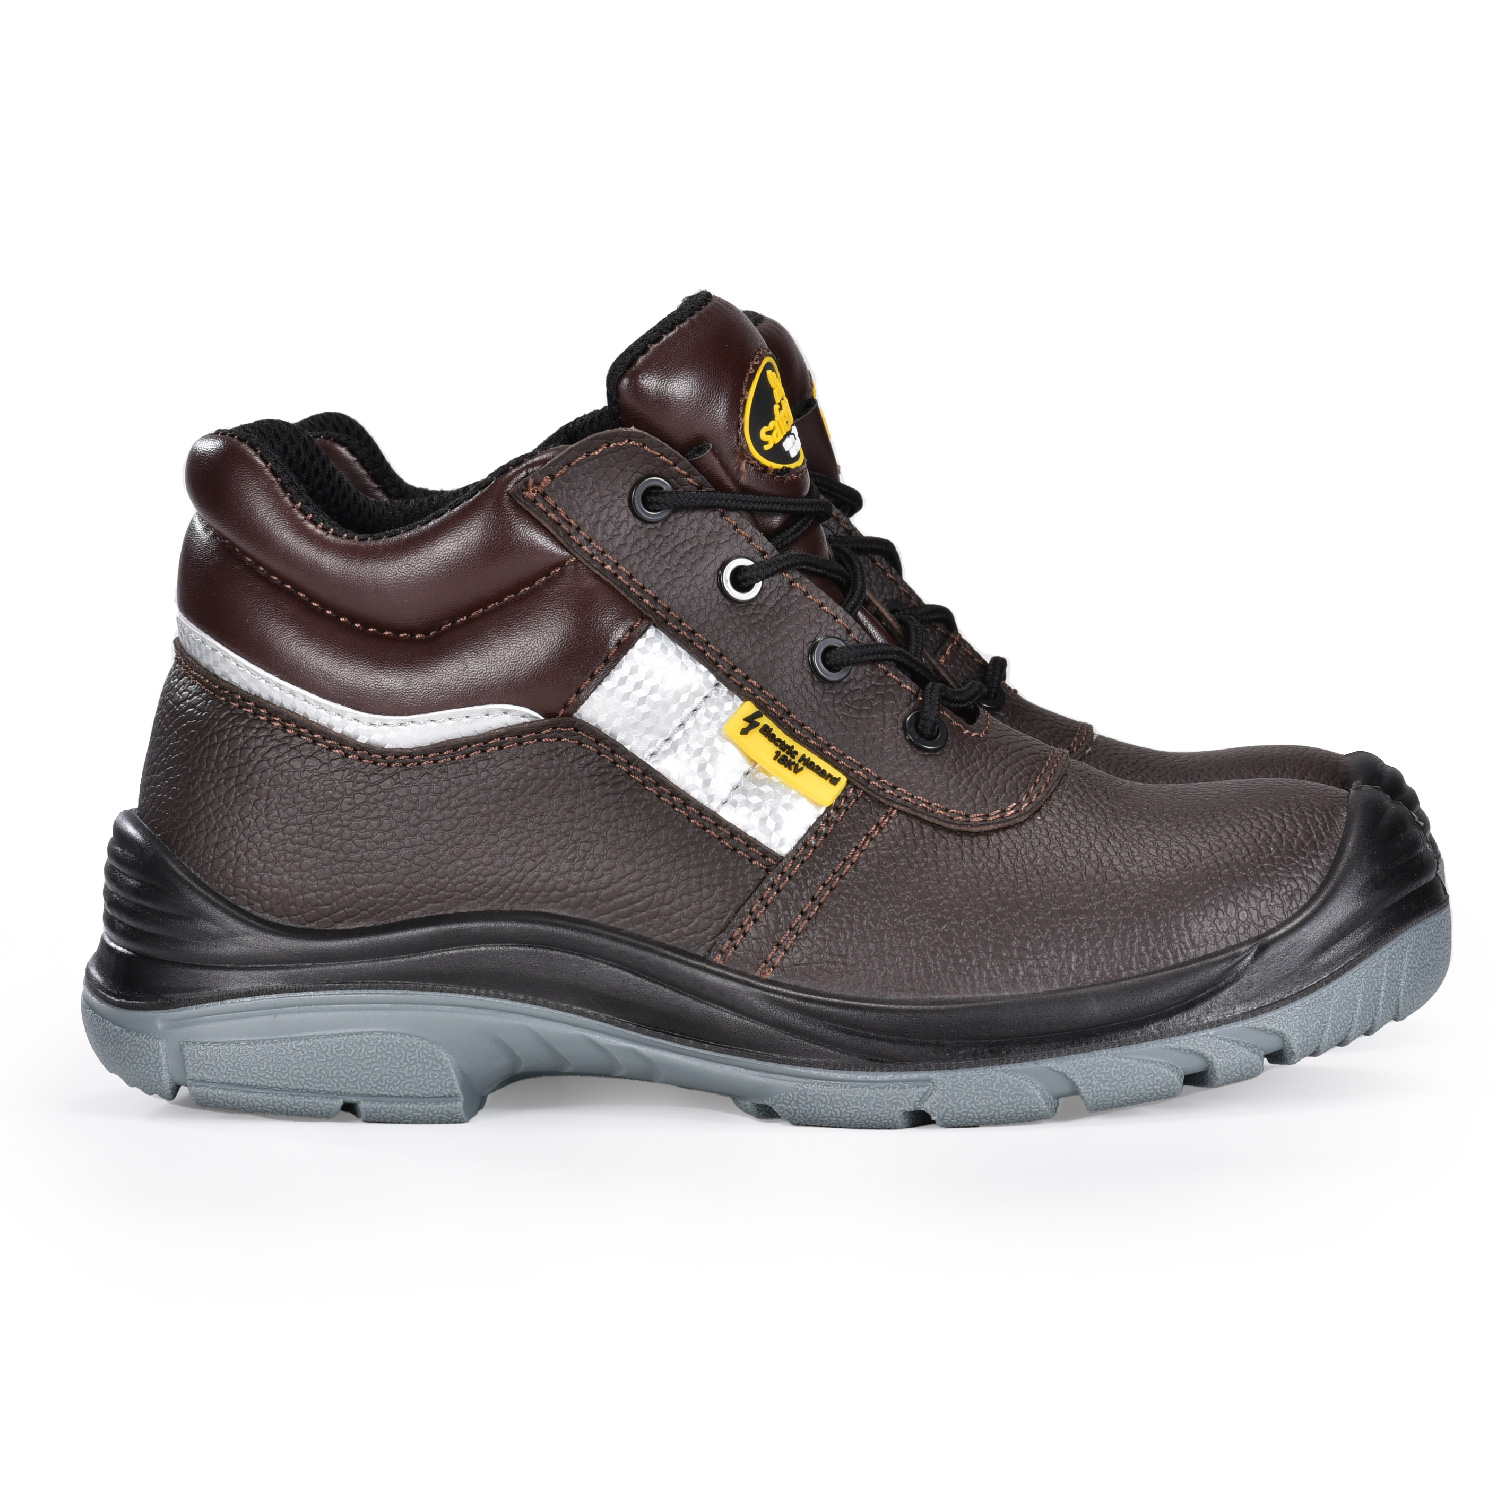 18KV Electric Hazard Insulated Work Boots for Electrician Mens M-8027 EH